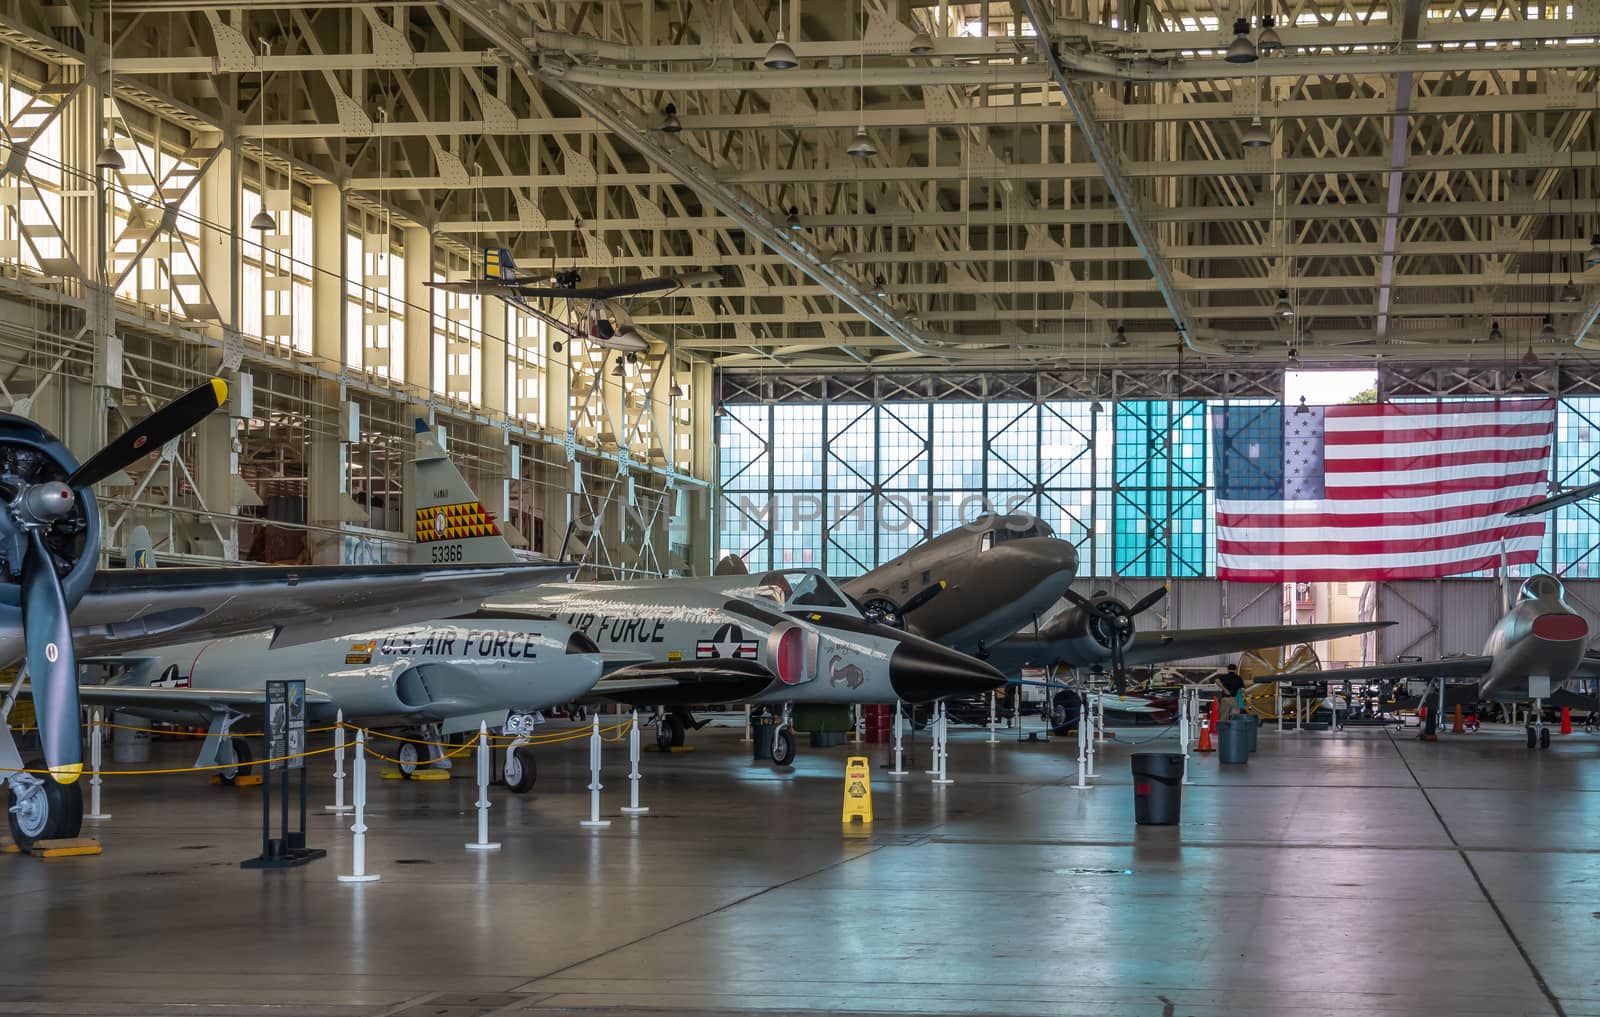 Oahu, Hawaii, USA. - January 10, 2020: Pearl Harbor Aviation Museum. Line of airplanes in hangar with large USA flag in back. Beige roof. Natural light through windows.